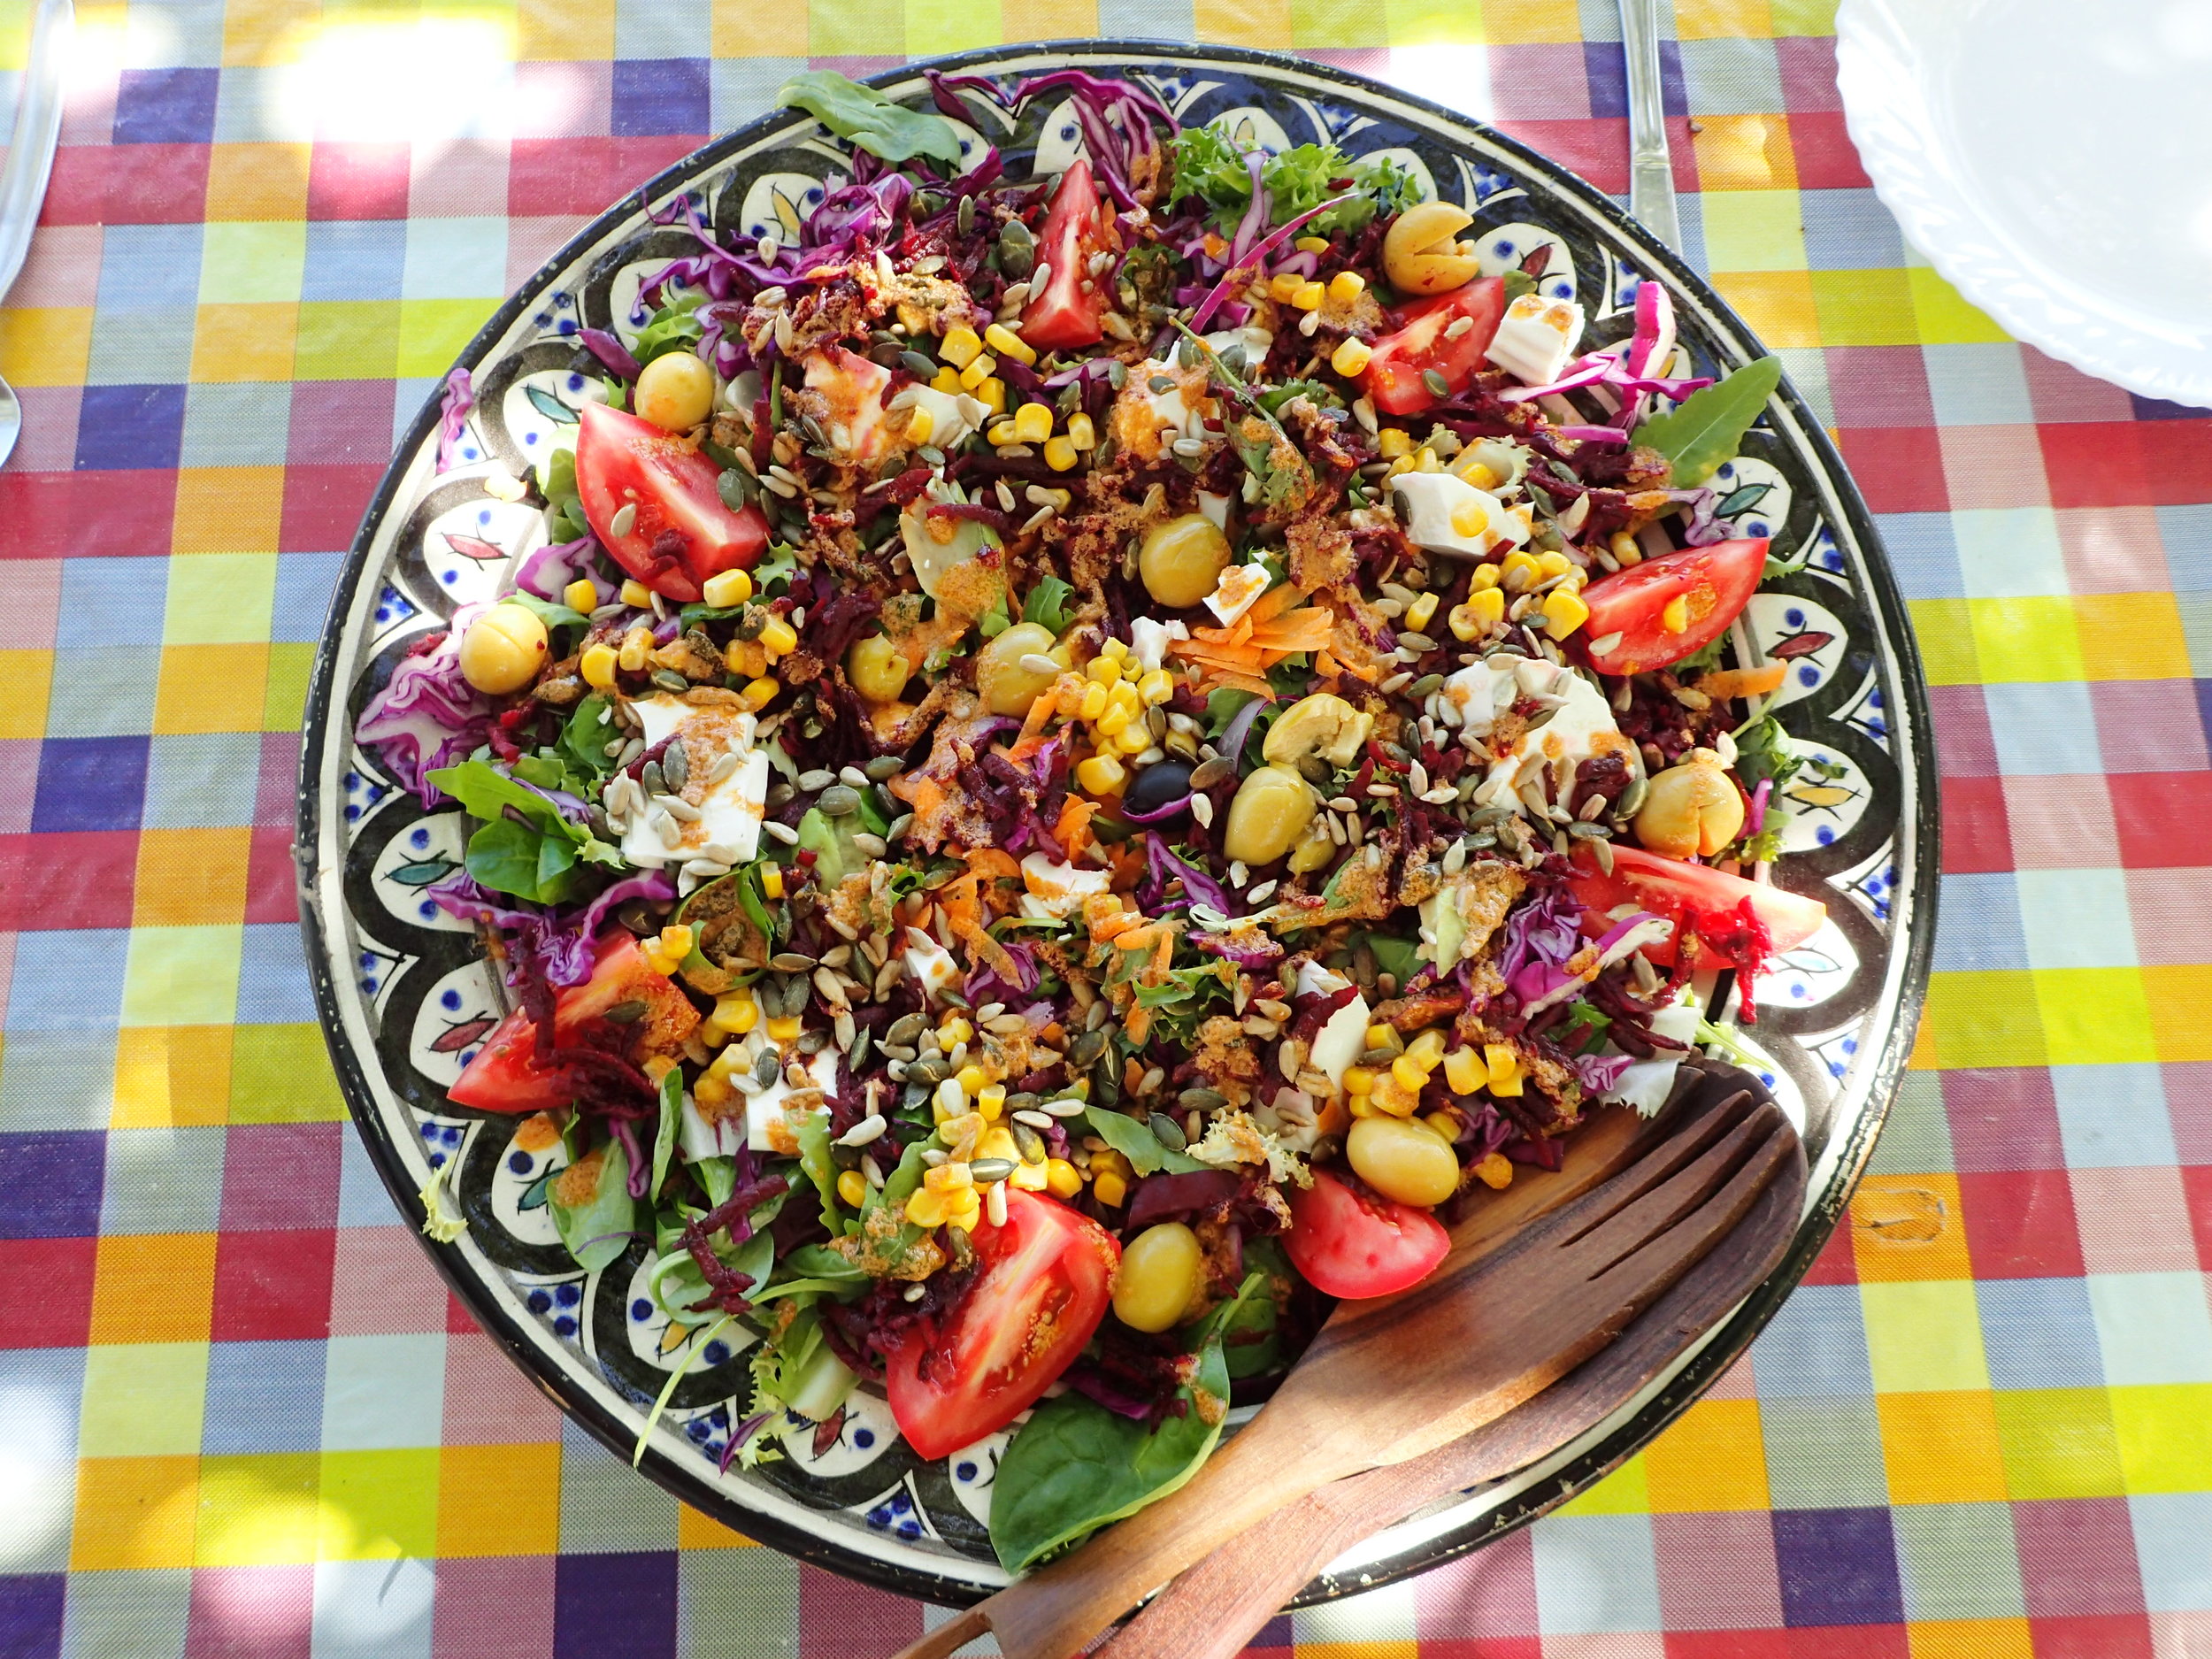 Vegan salad at Yoga retreat in the mountains in Spain with Jane Bakx Yoga